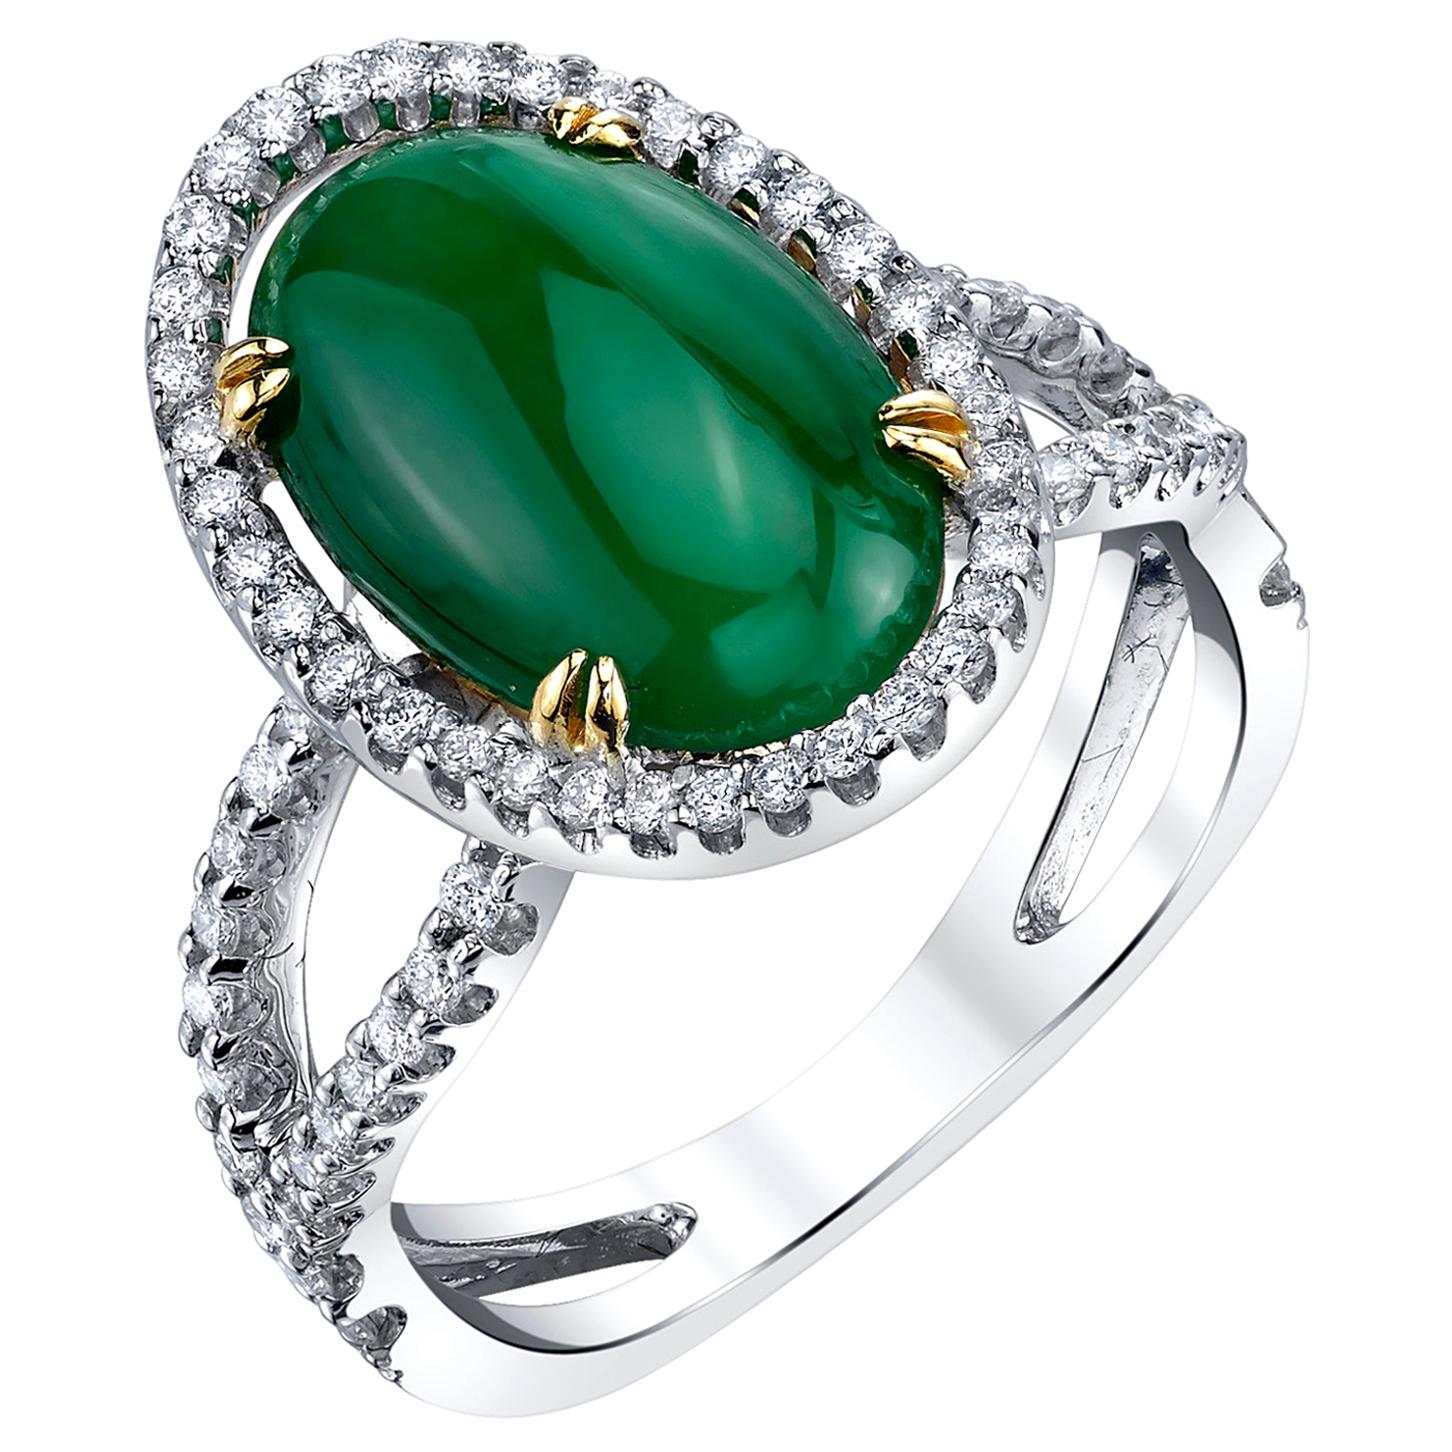 GIA Certified 3.32 Carat Imperial Jadeite and Diamond Ring in 18k White Gold